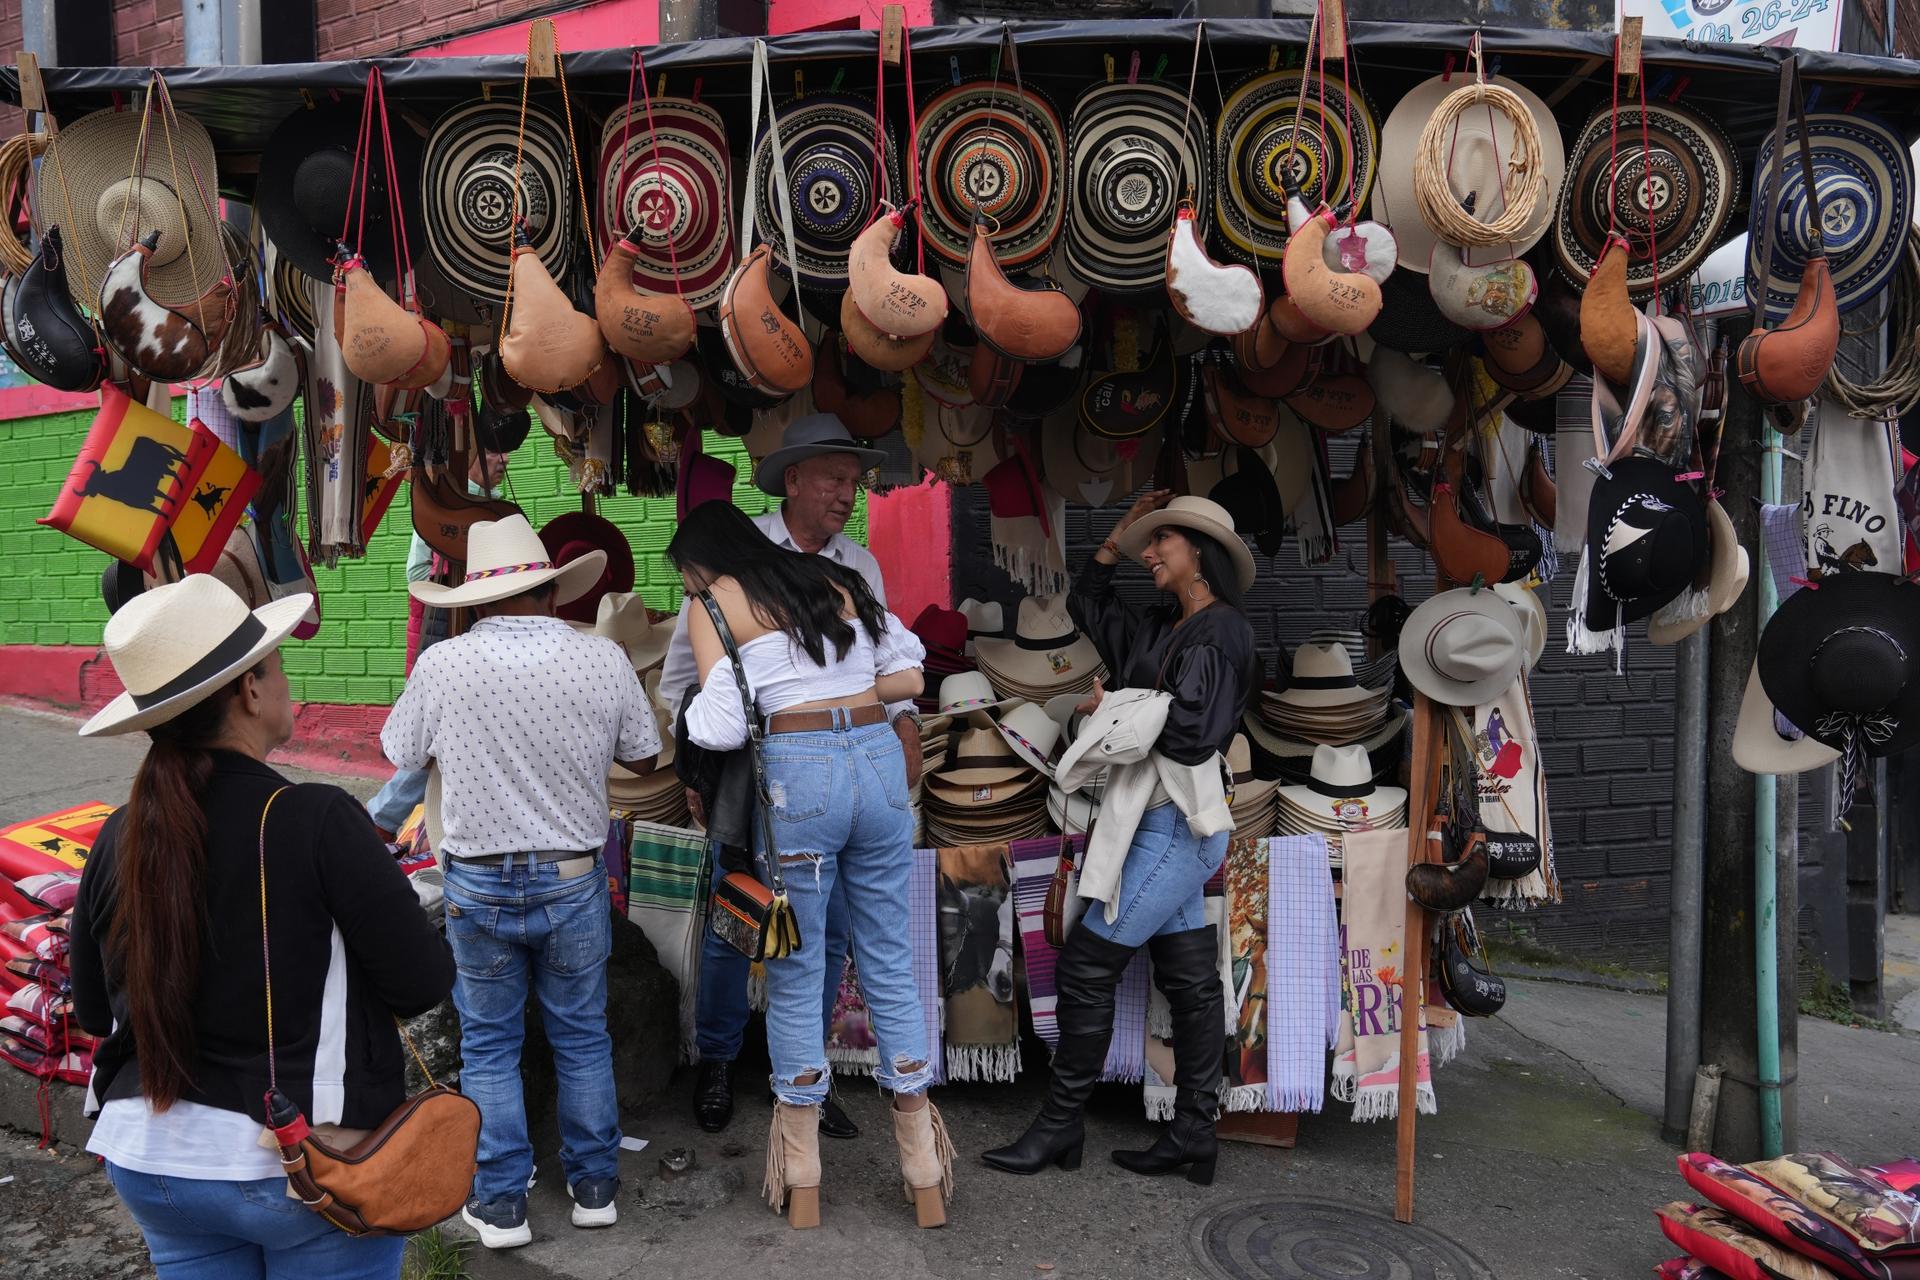 Thousands of tourists visit Manizales, Colombia, each year to watch its bullfighting festival, and spend money in hotels and shops.